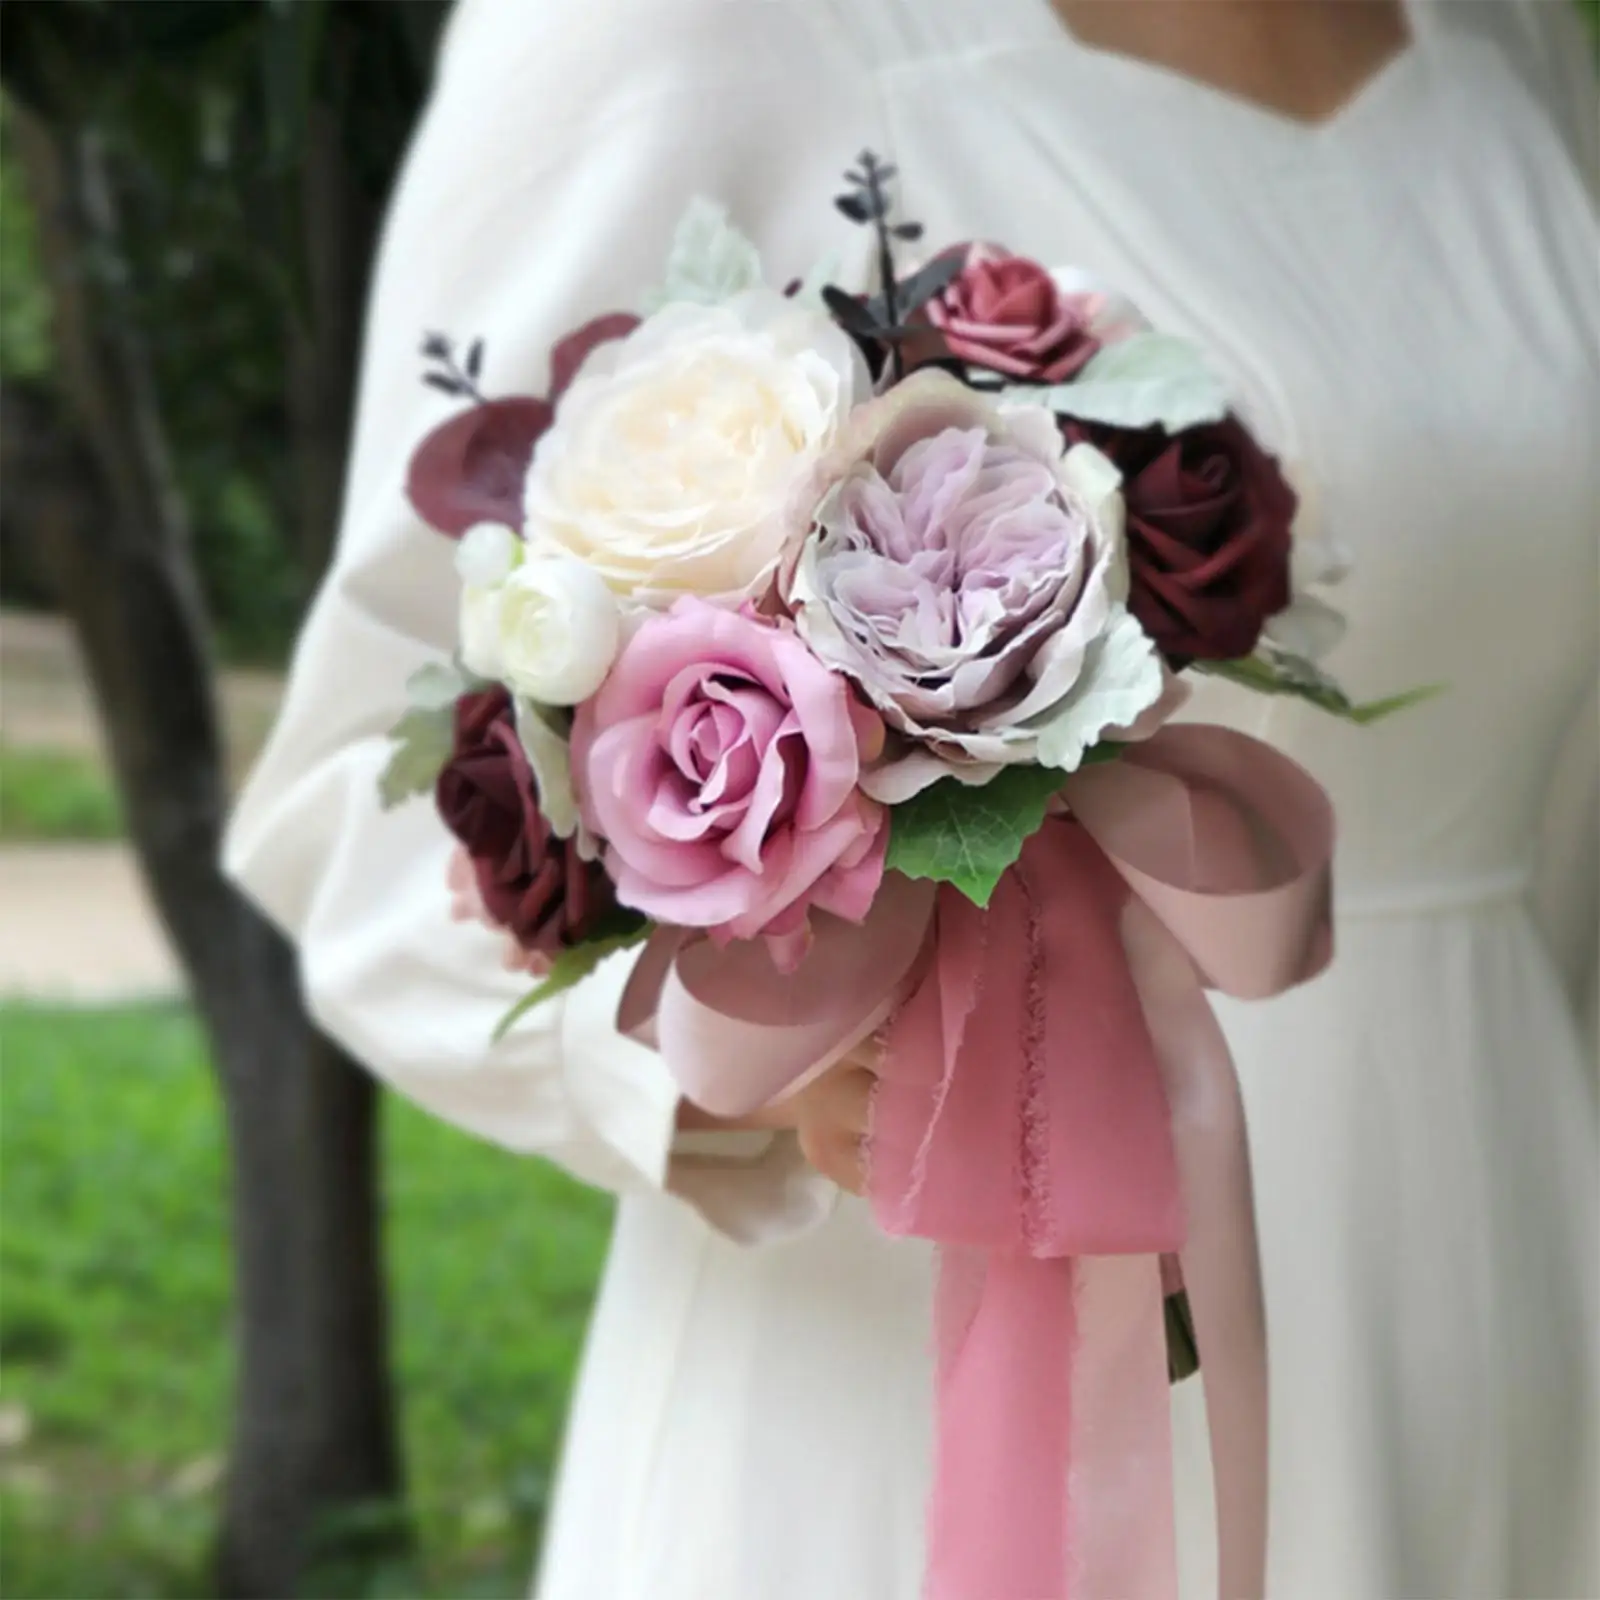 Silk Cloth Bridal Wedding Bouquets Wedding Throw Bouquet Romantic Artificial Flowers for Anniversary Event Celebrations Activity